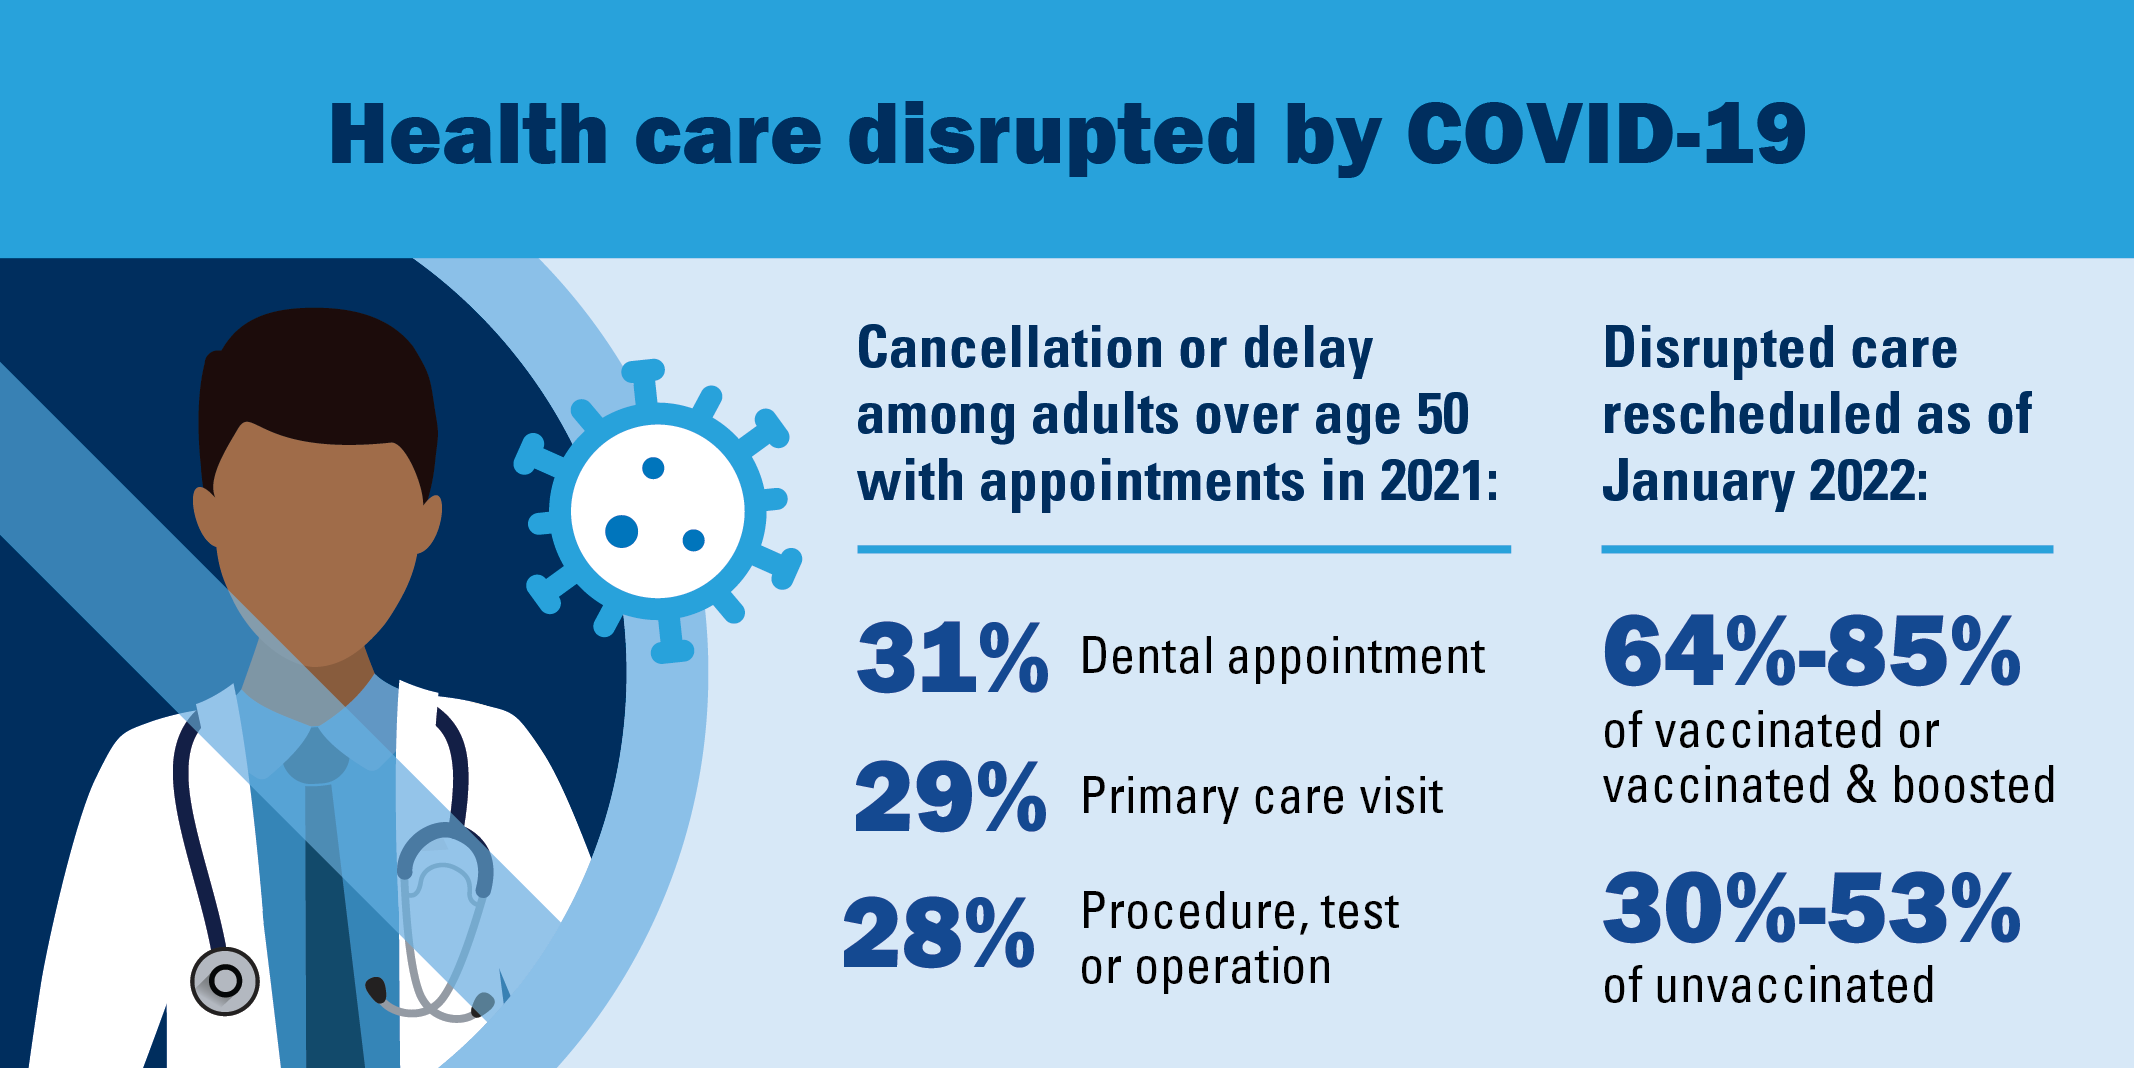 Health care disrupted by COVID-19